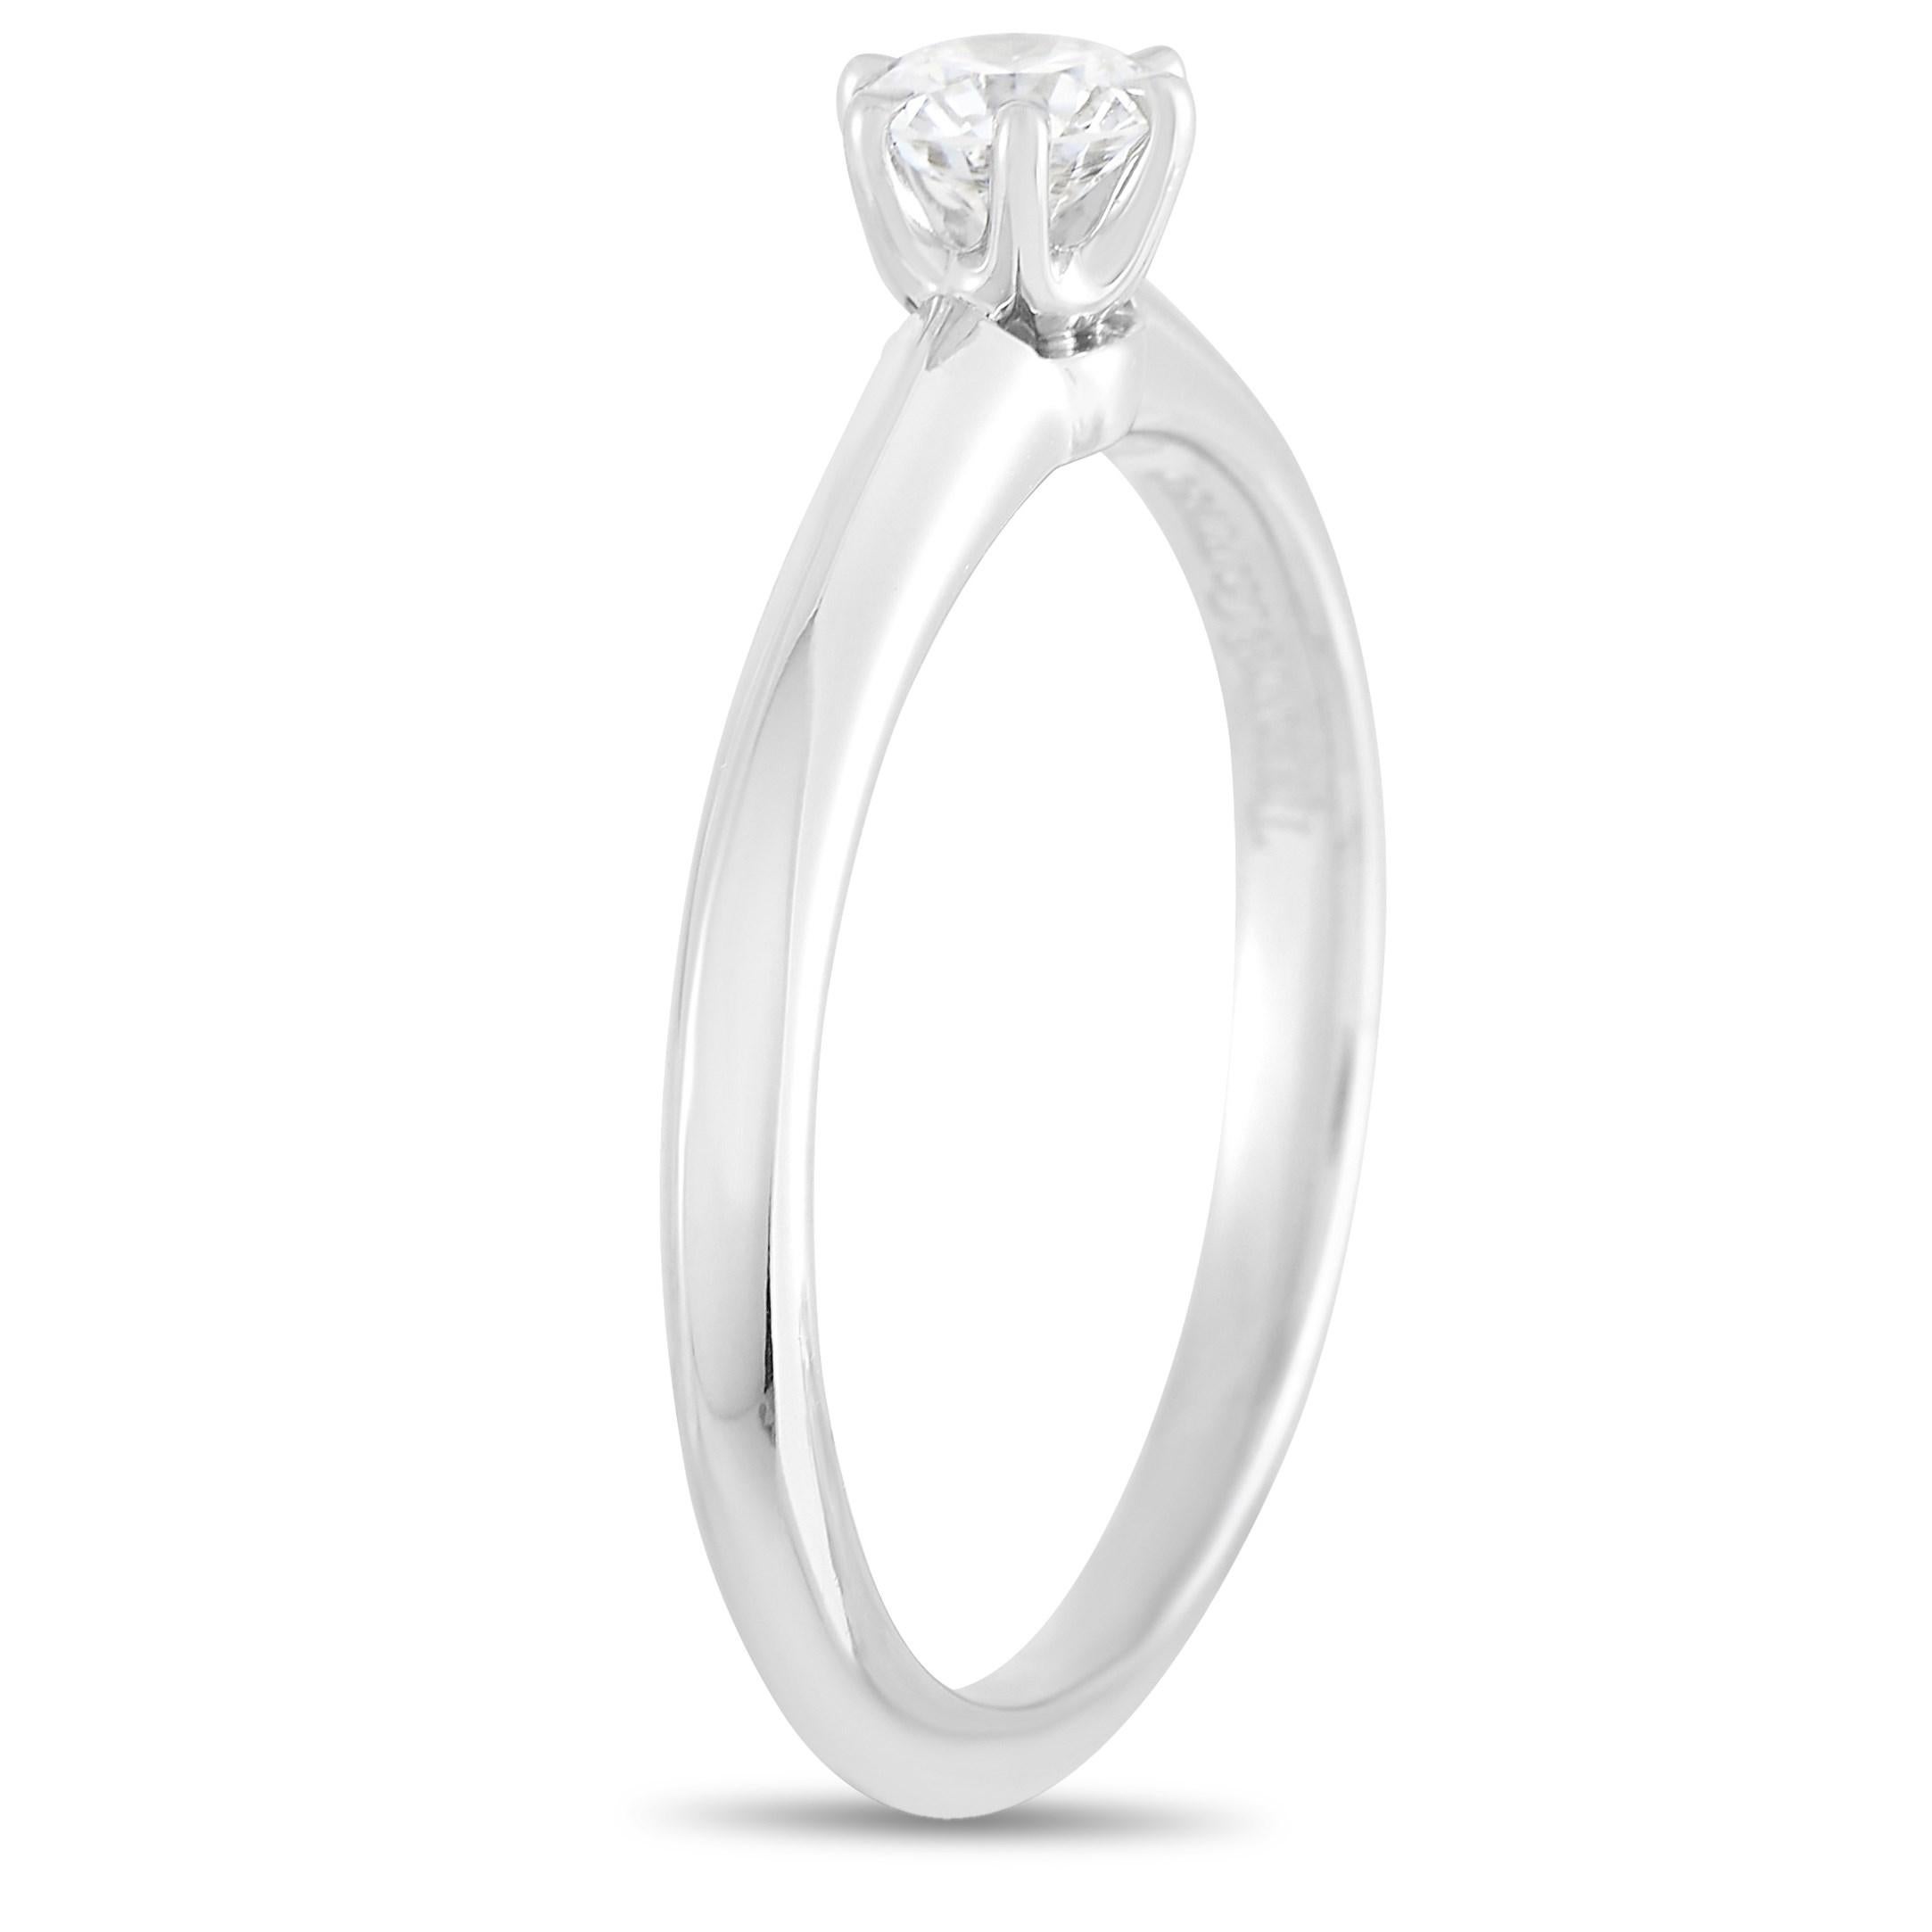 Six prongs, slender knife-edge band, round brilliant diamond - all these point to the iconic beauty of a Tiffany & Co Setting Engagement Ring. This Tiffany & Co. Setting Platinum 0.25 ct Diamond Engagement Ring in particular displays a 0.25-carat